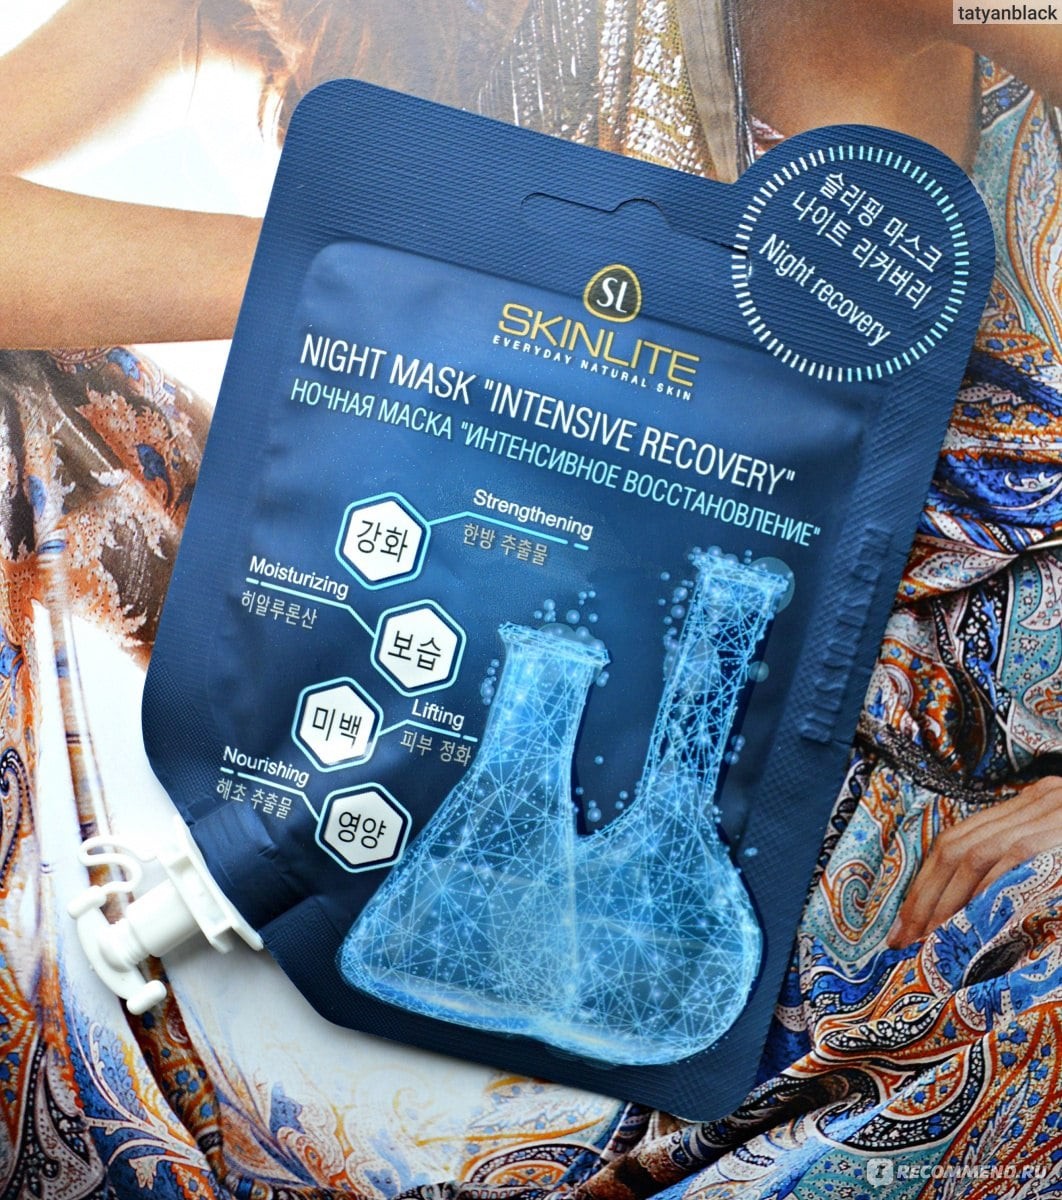 Intensive Recovery Night Mask [Skinlite]